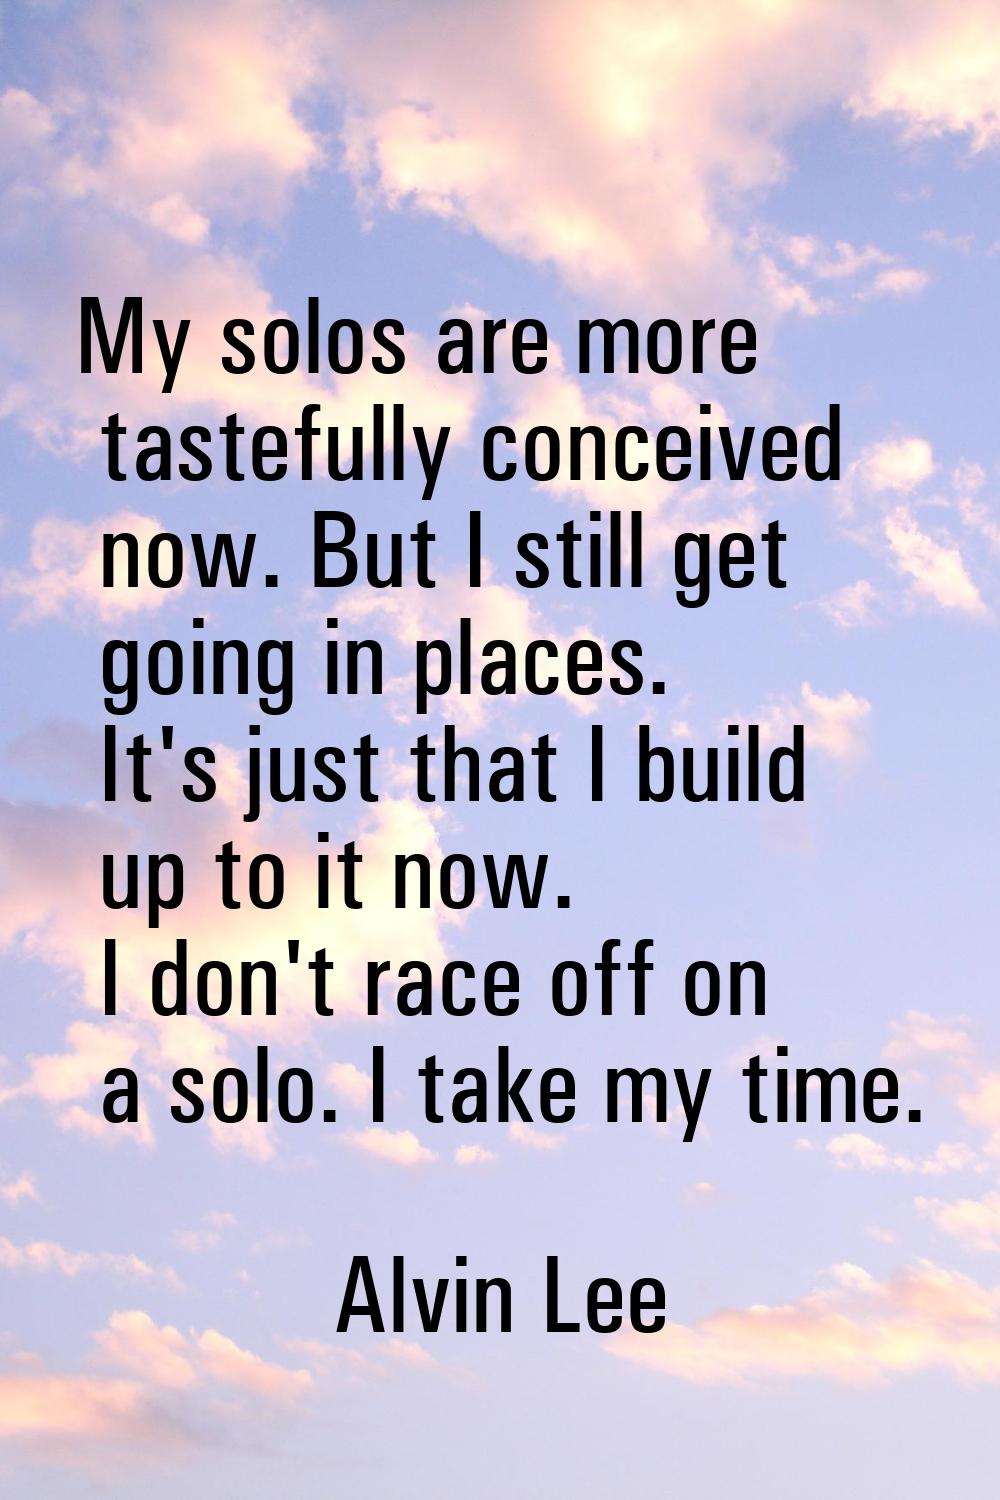 My solos are more tastefully conceived now. But I still get going in places. It's just that I build